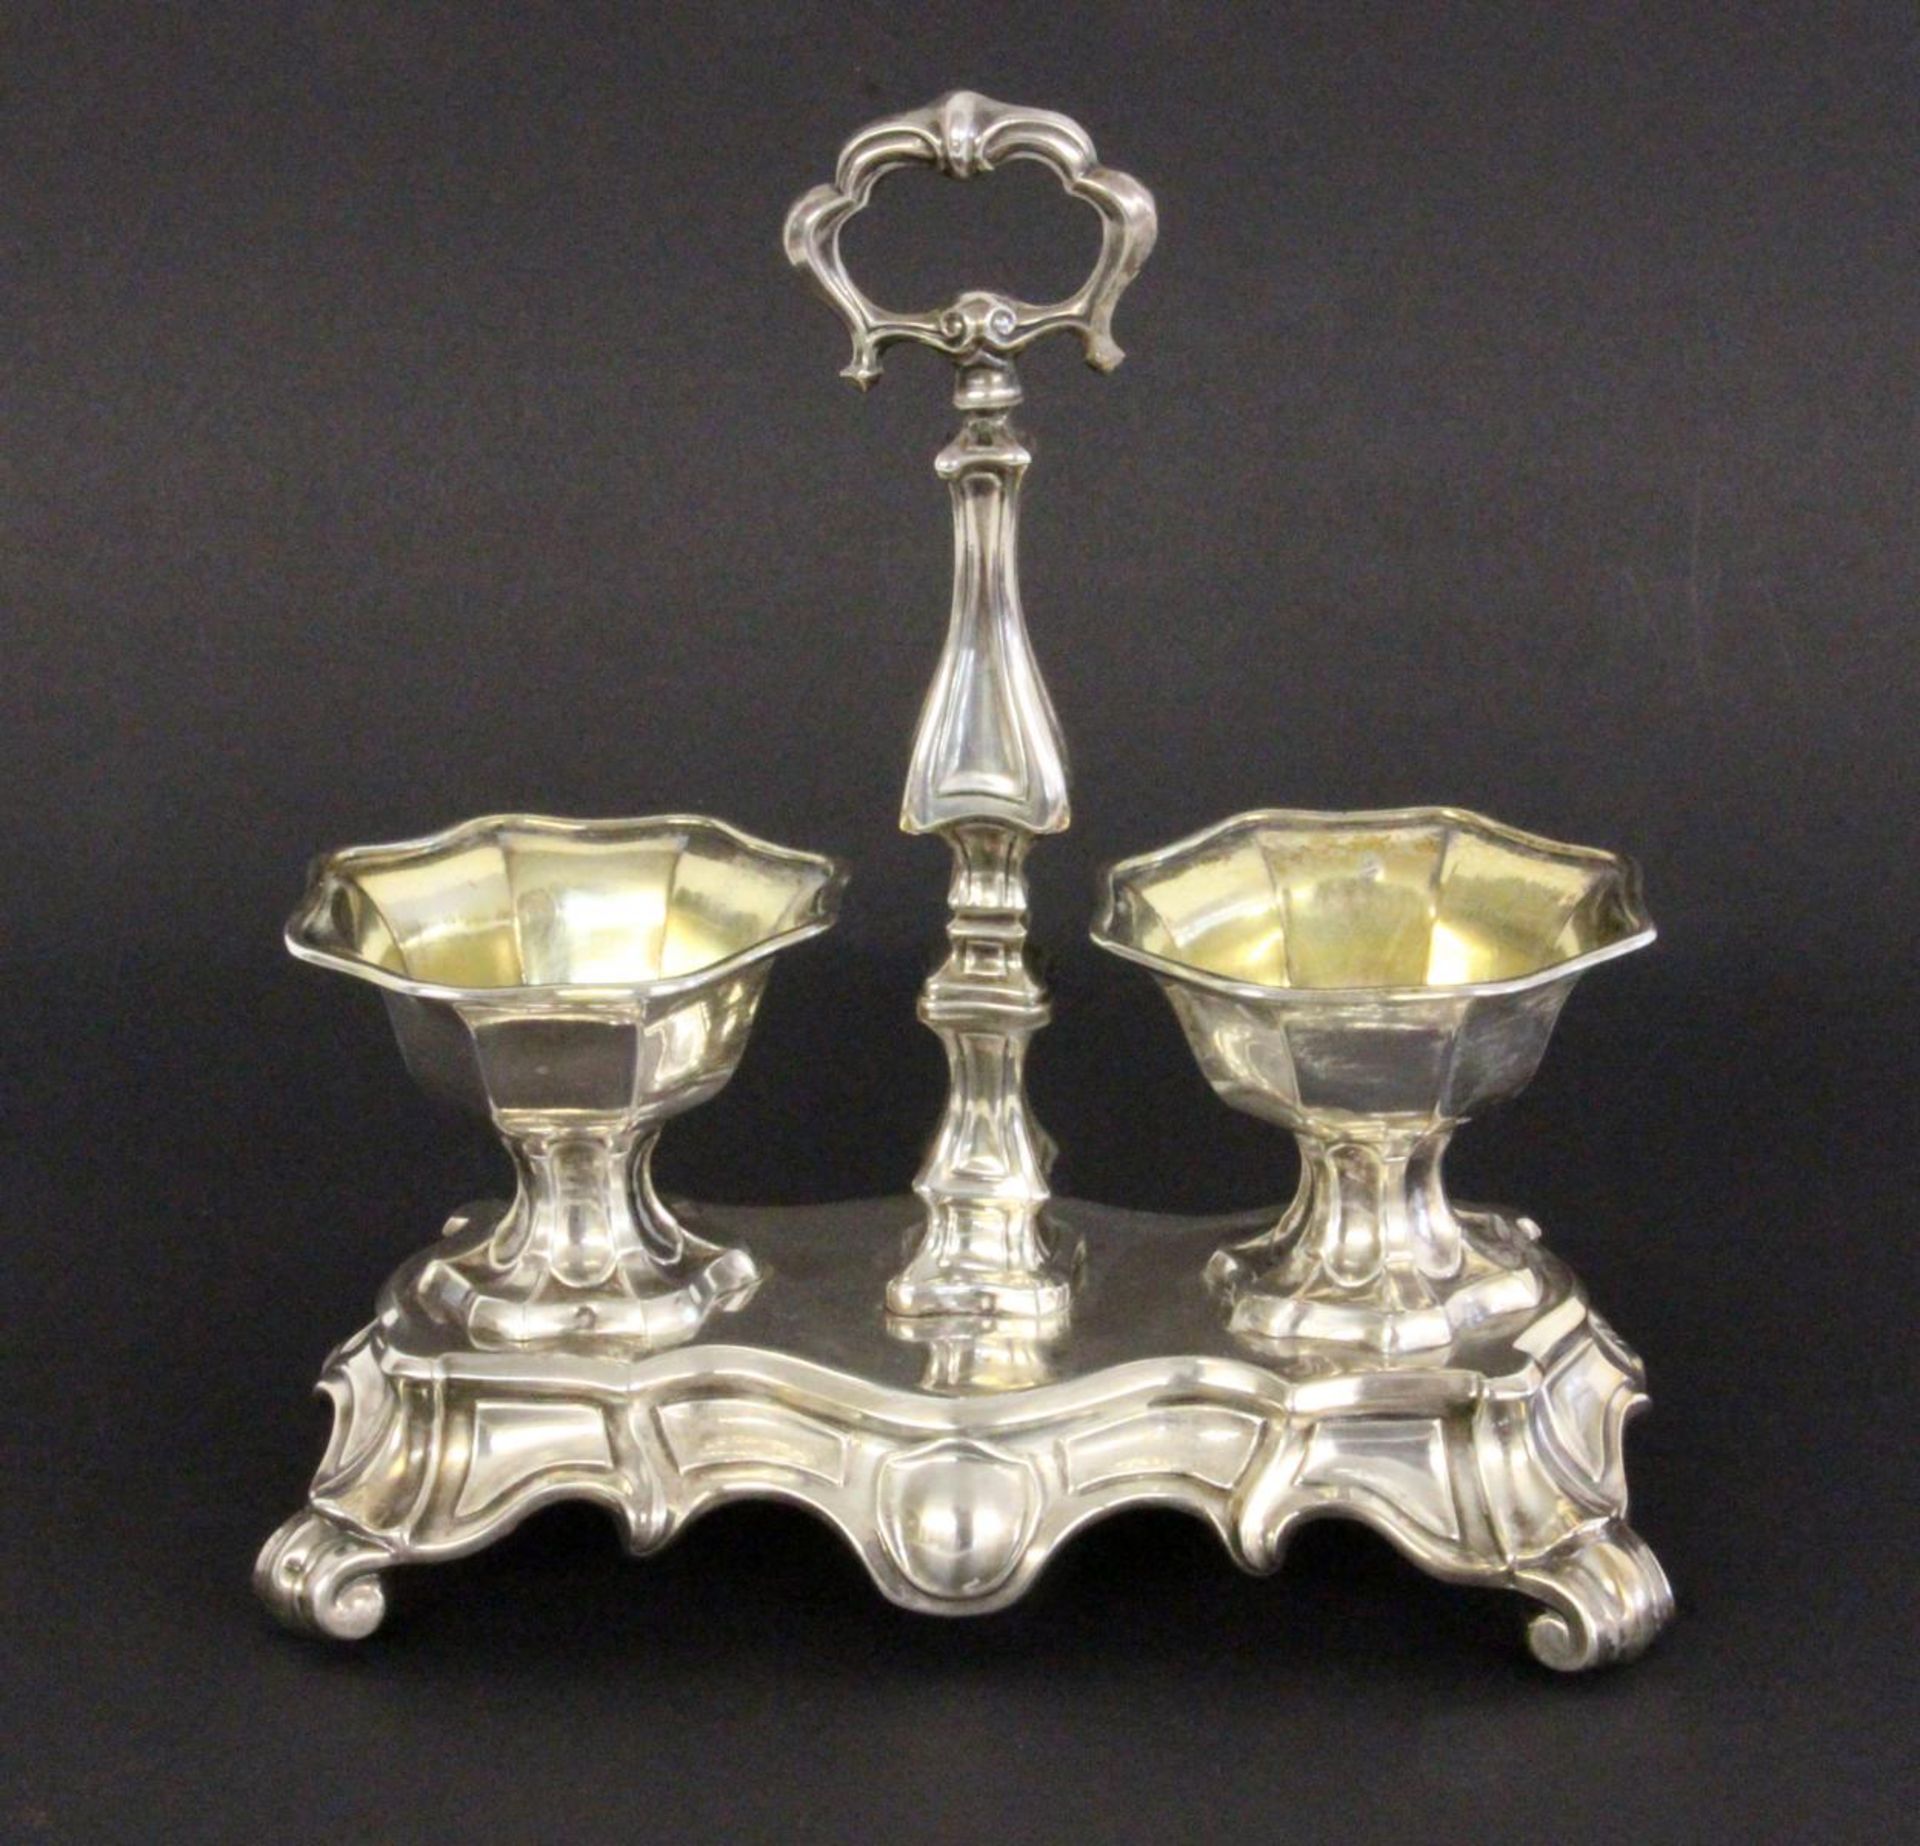 SALIERE France, 19th century silver. Baroque style with a central handle and 2octagonal spice